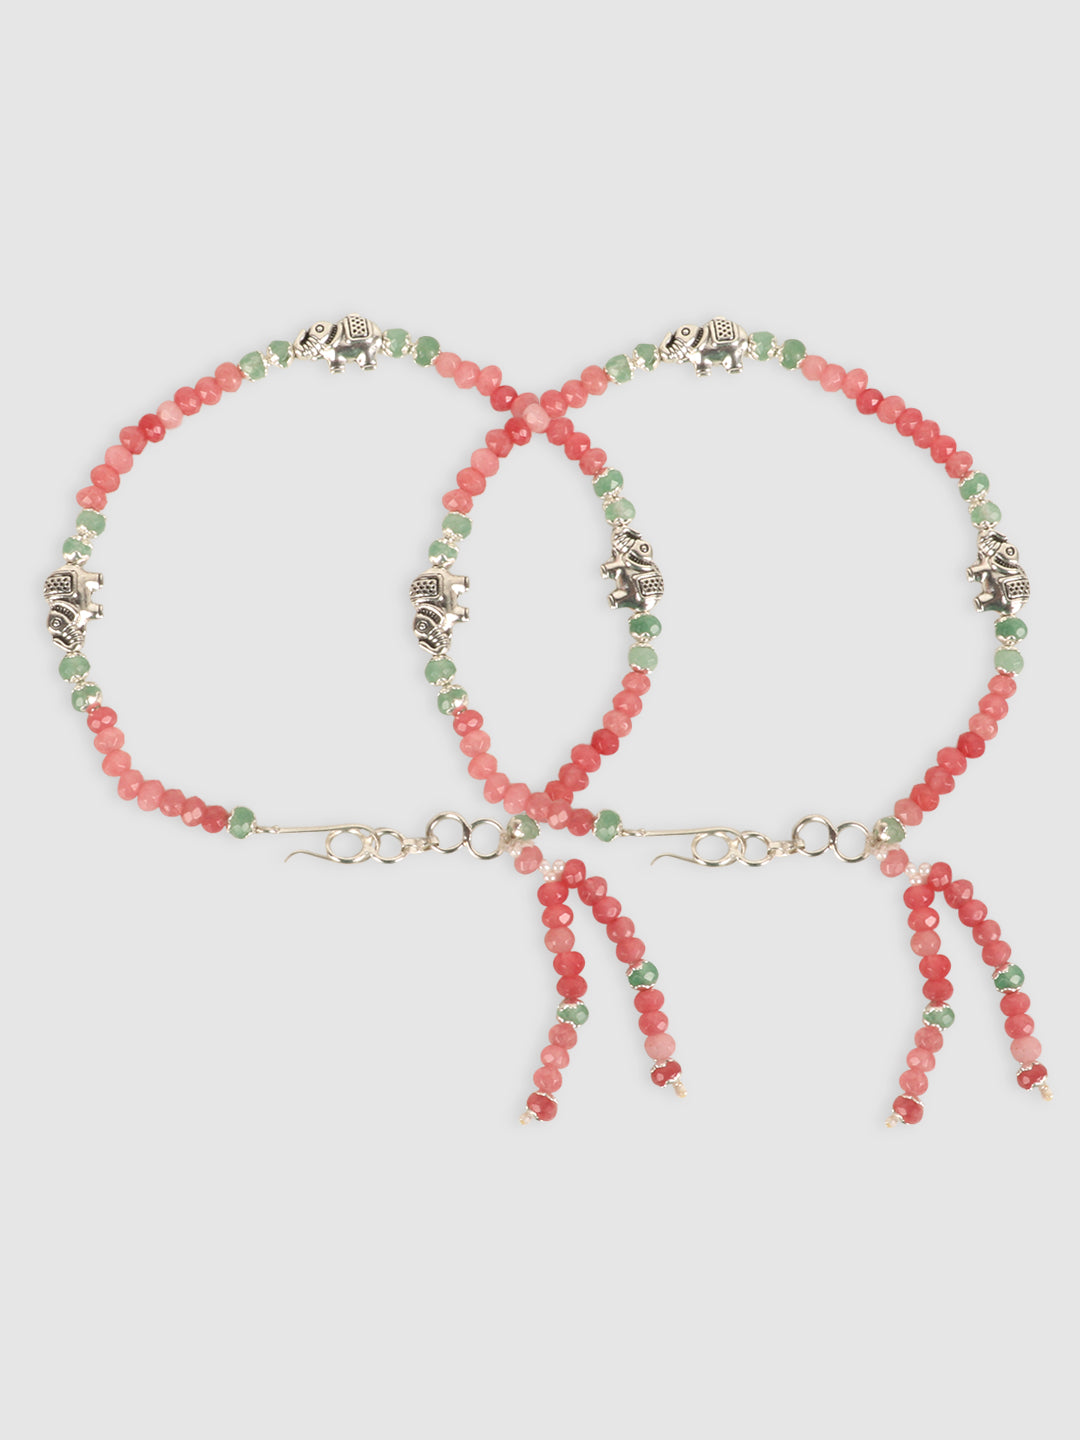 Stylish Sleek Pink & Silver-Toned Exclusive Designed Bead Anklets